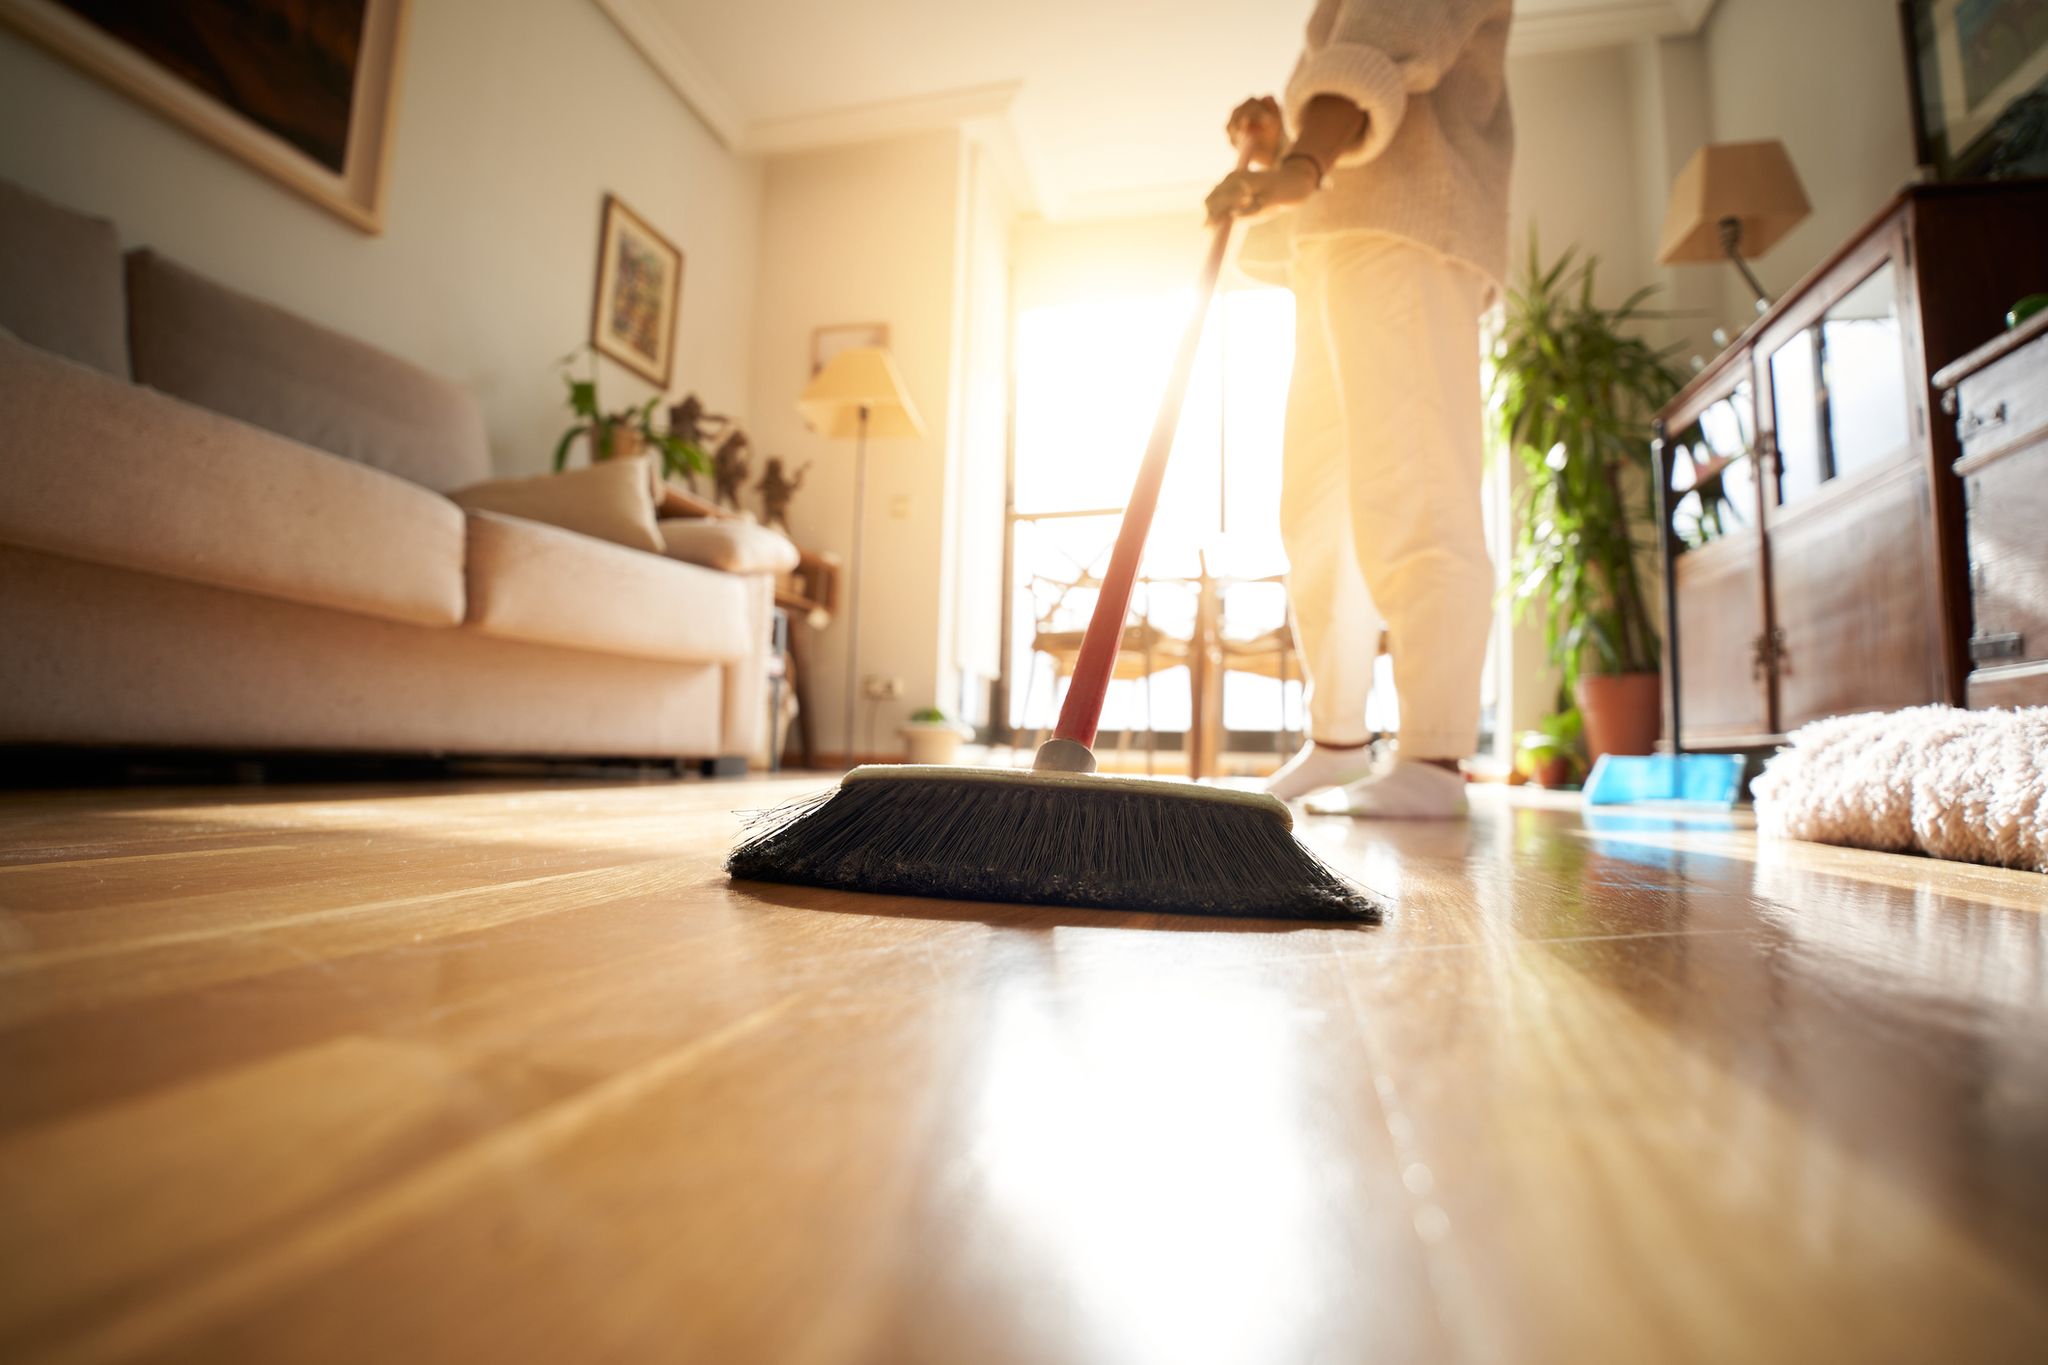 keep your floors sparkling clean